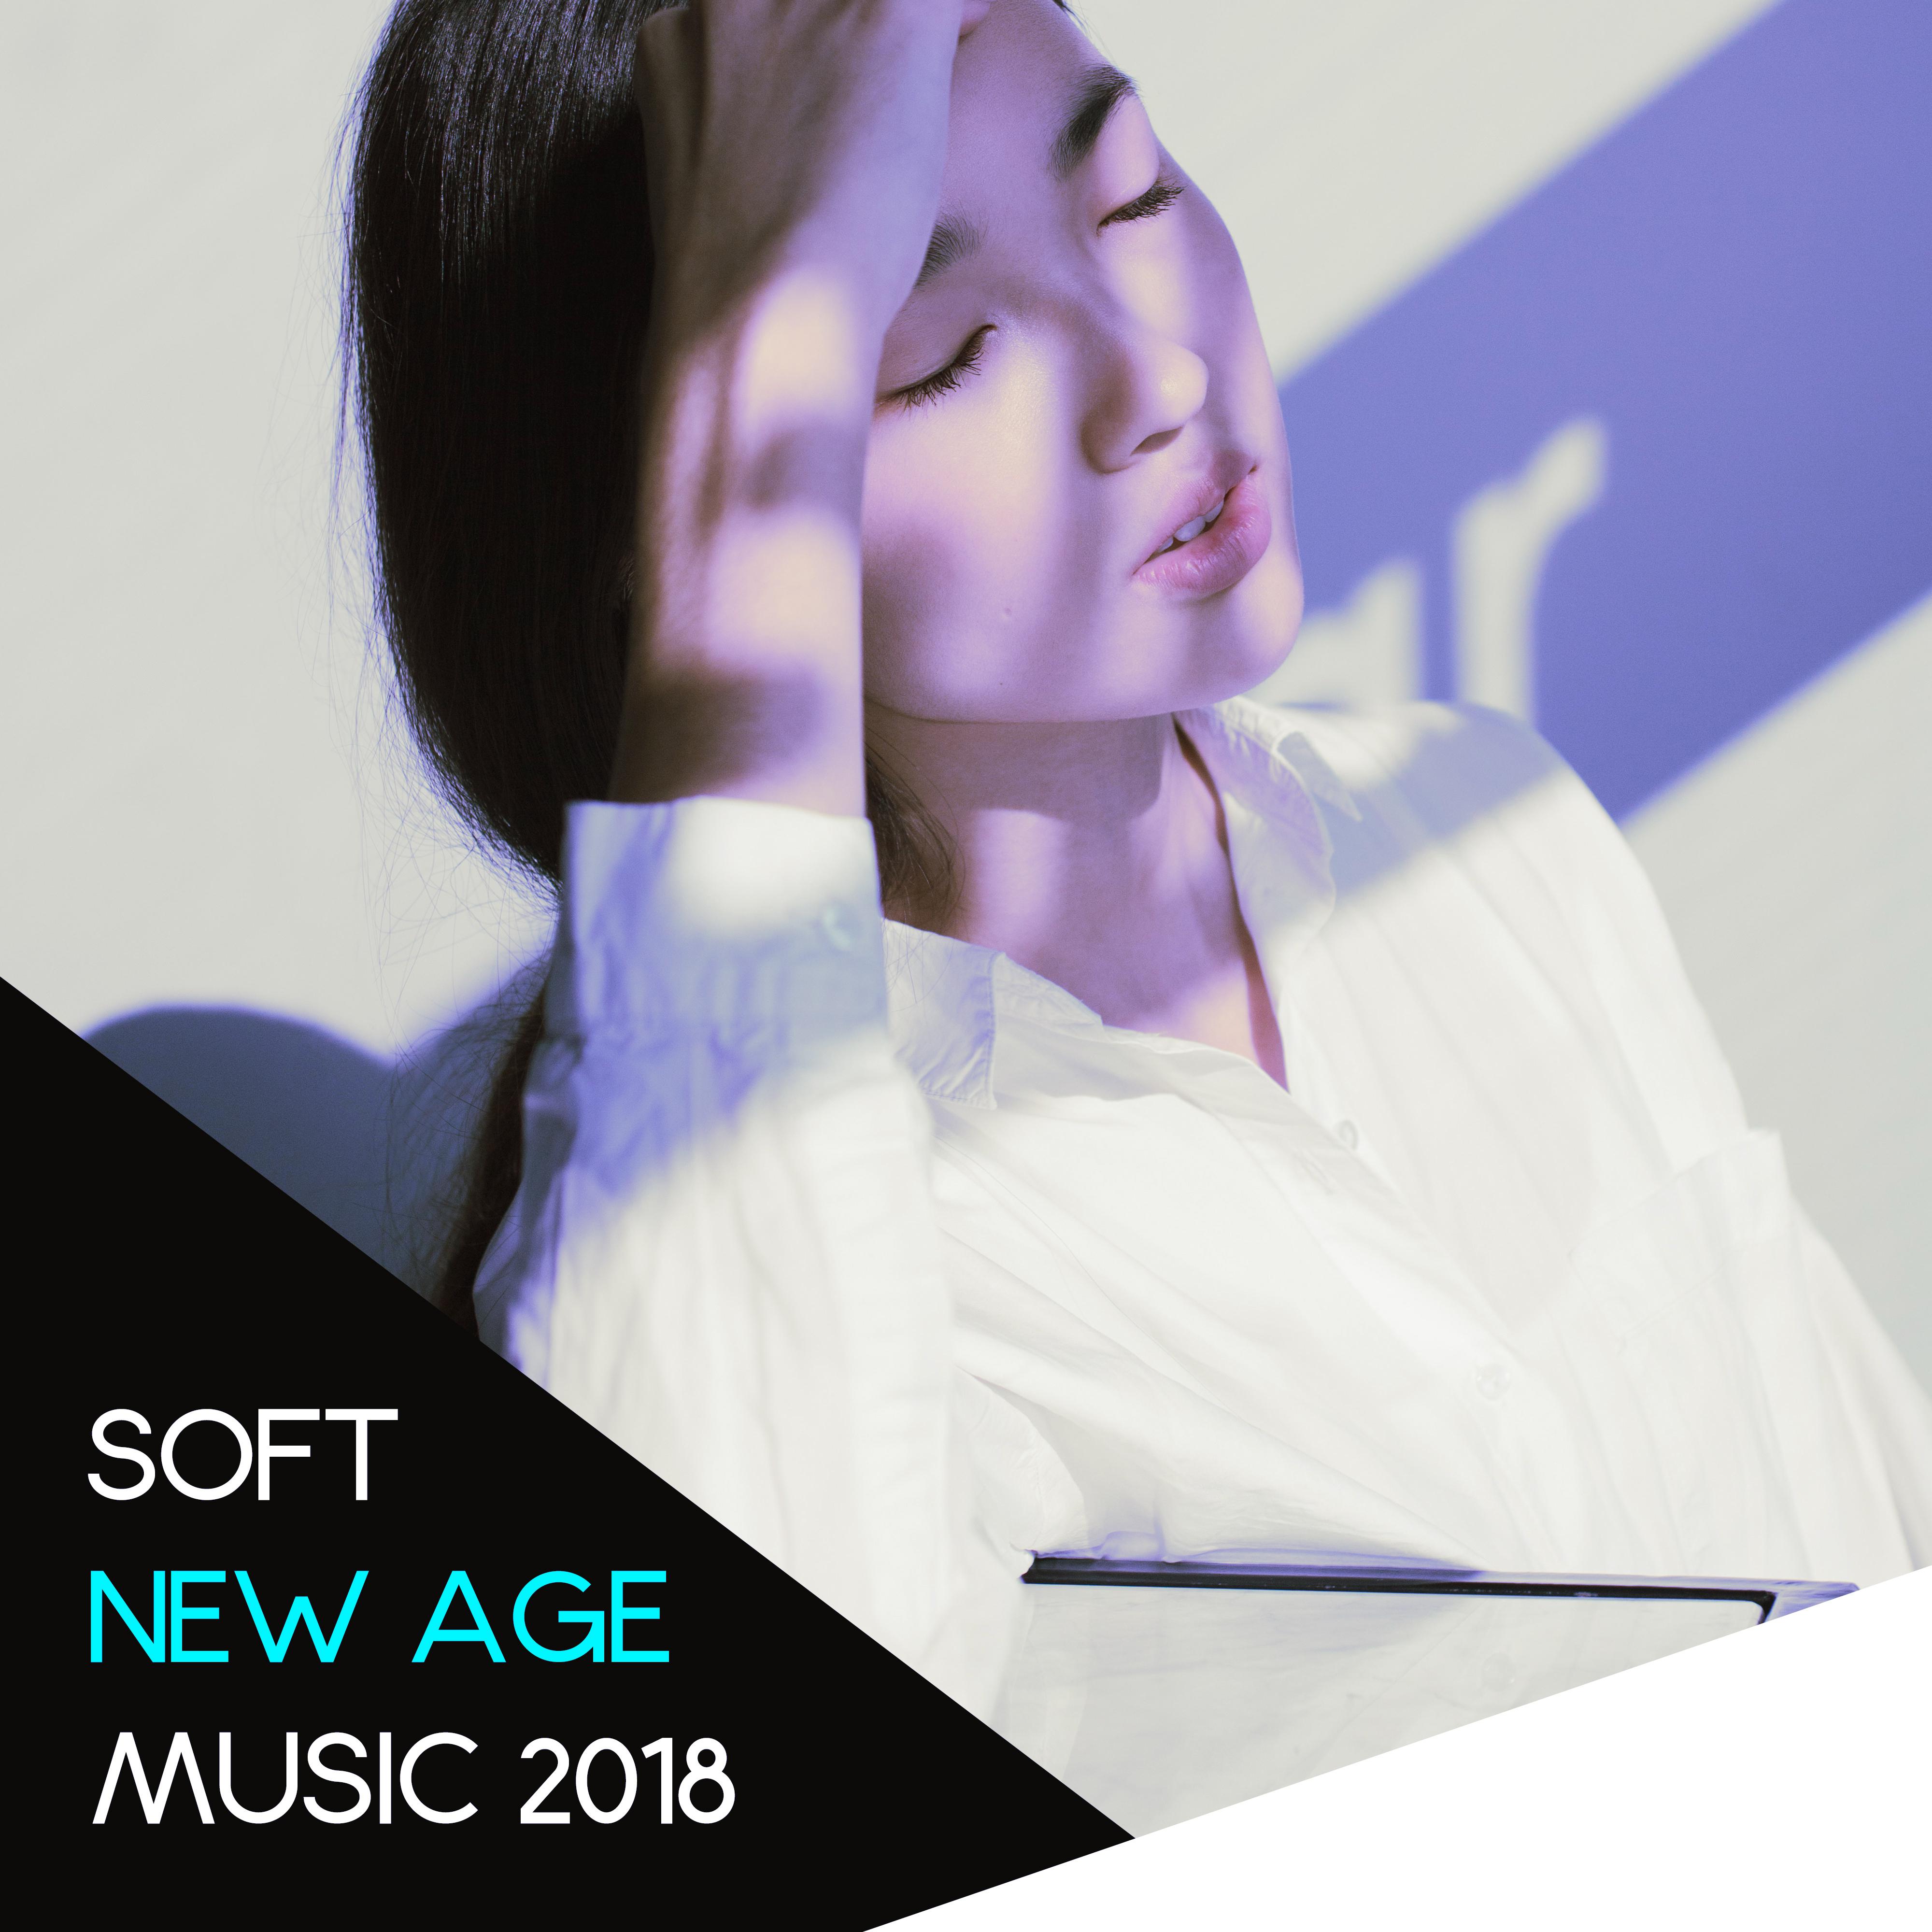 Soft New Age Music 2018